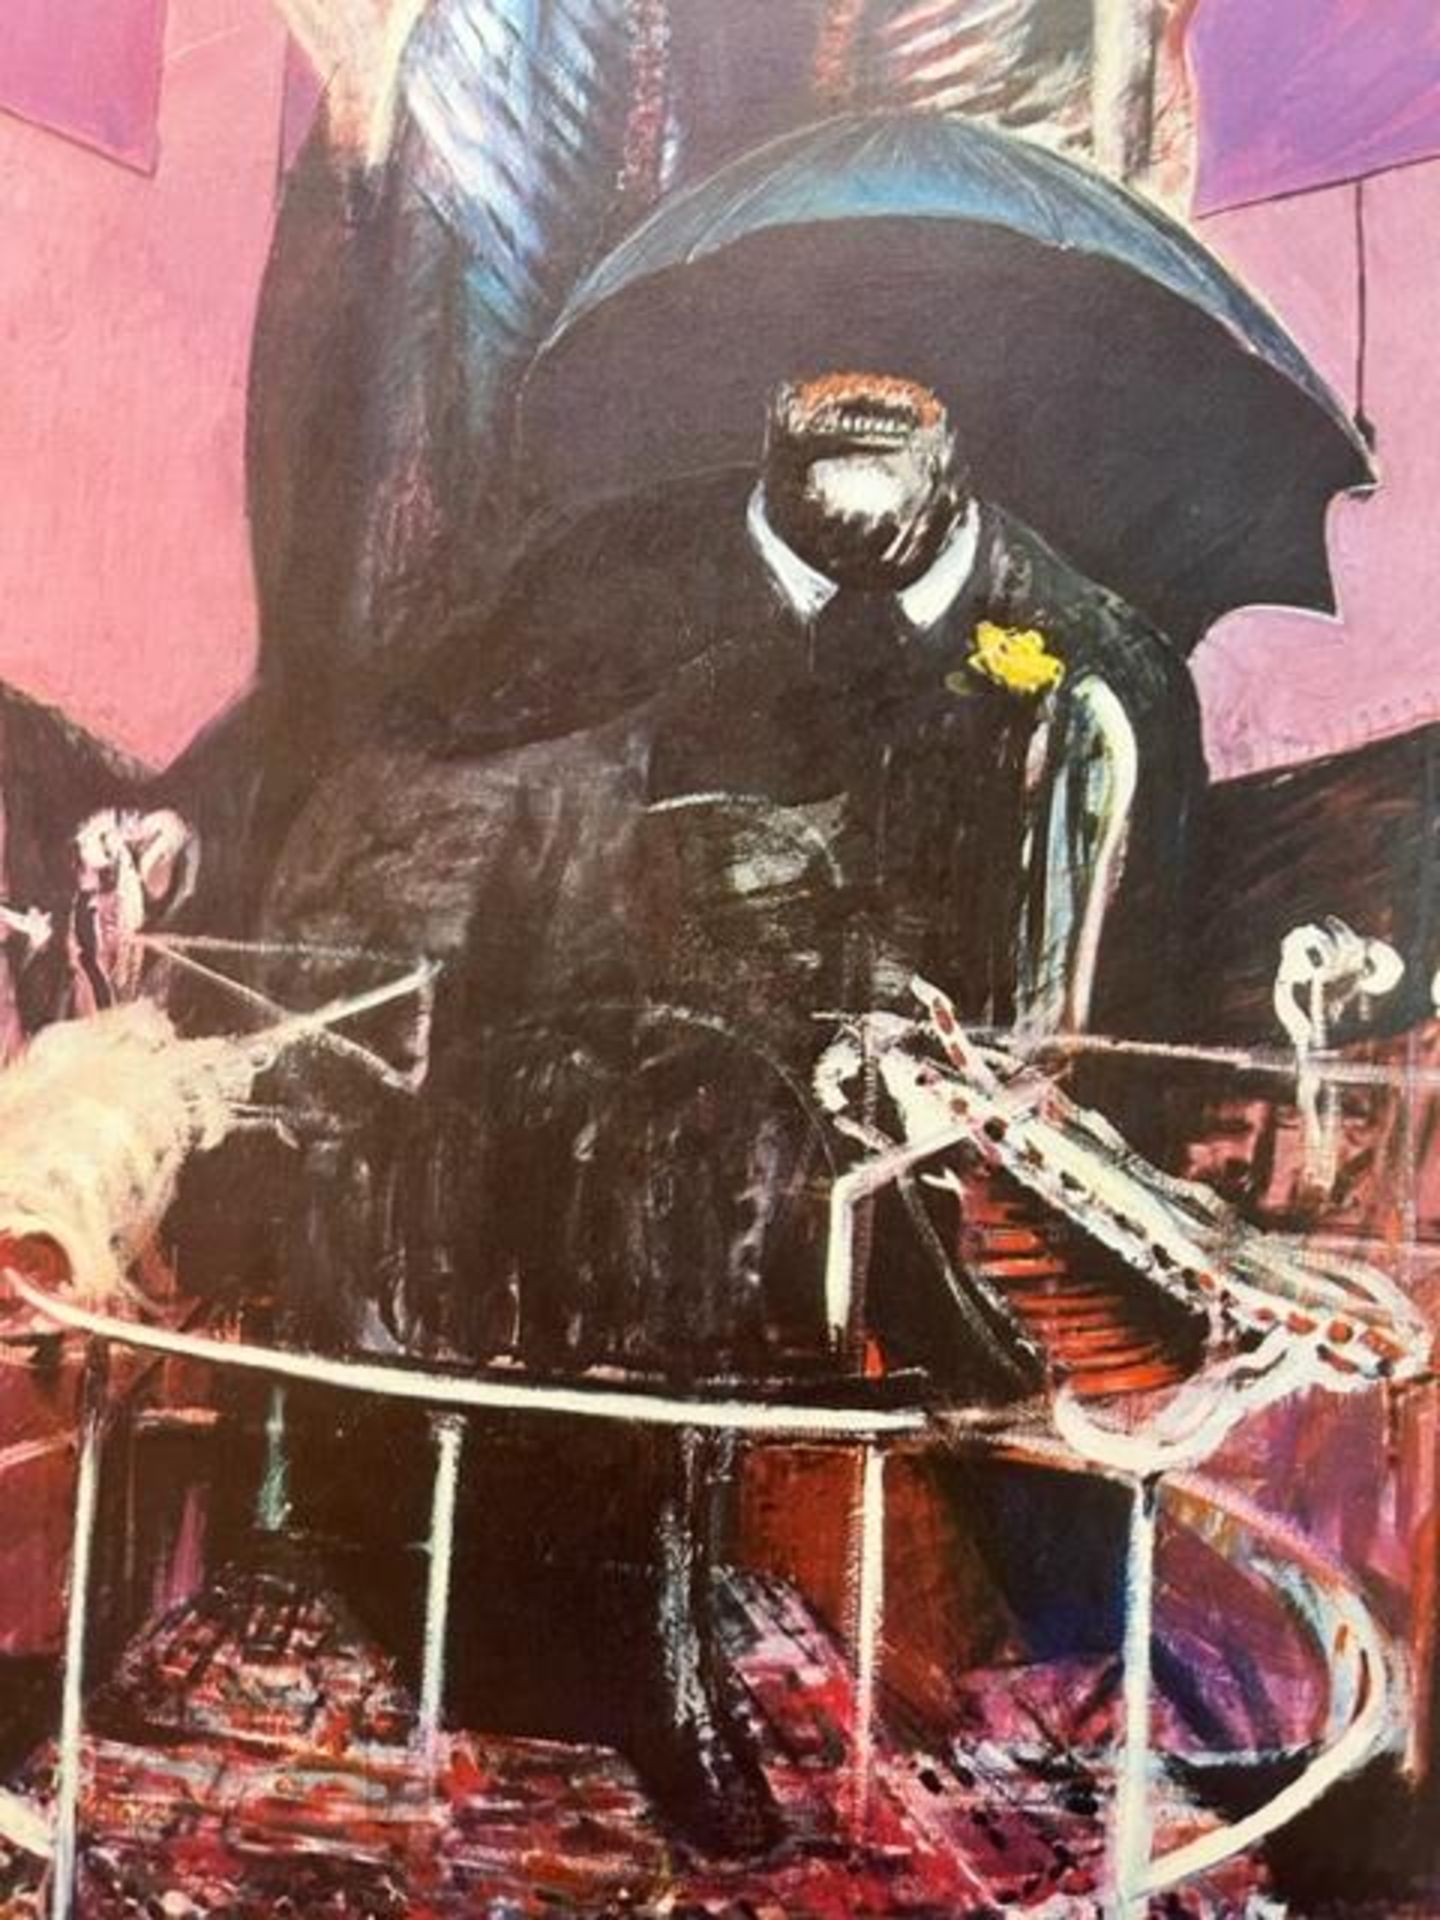 Francis Bacon "Painting" Print. - Image 10 of 12